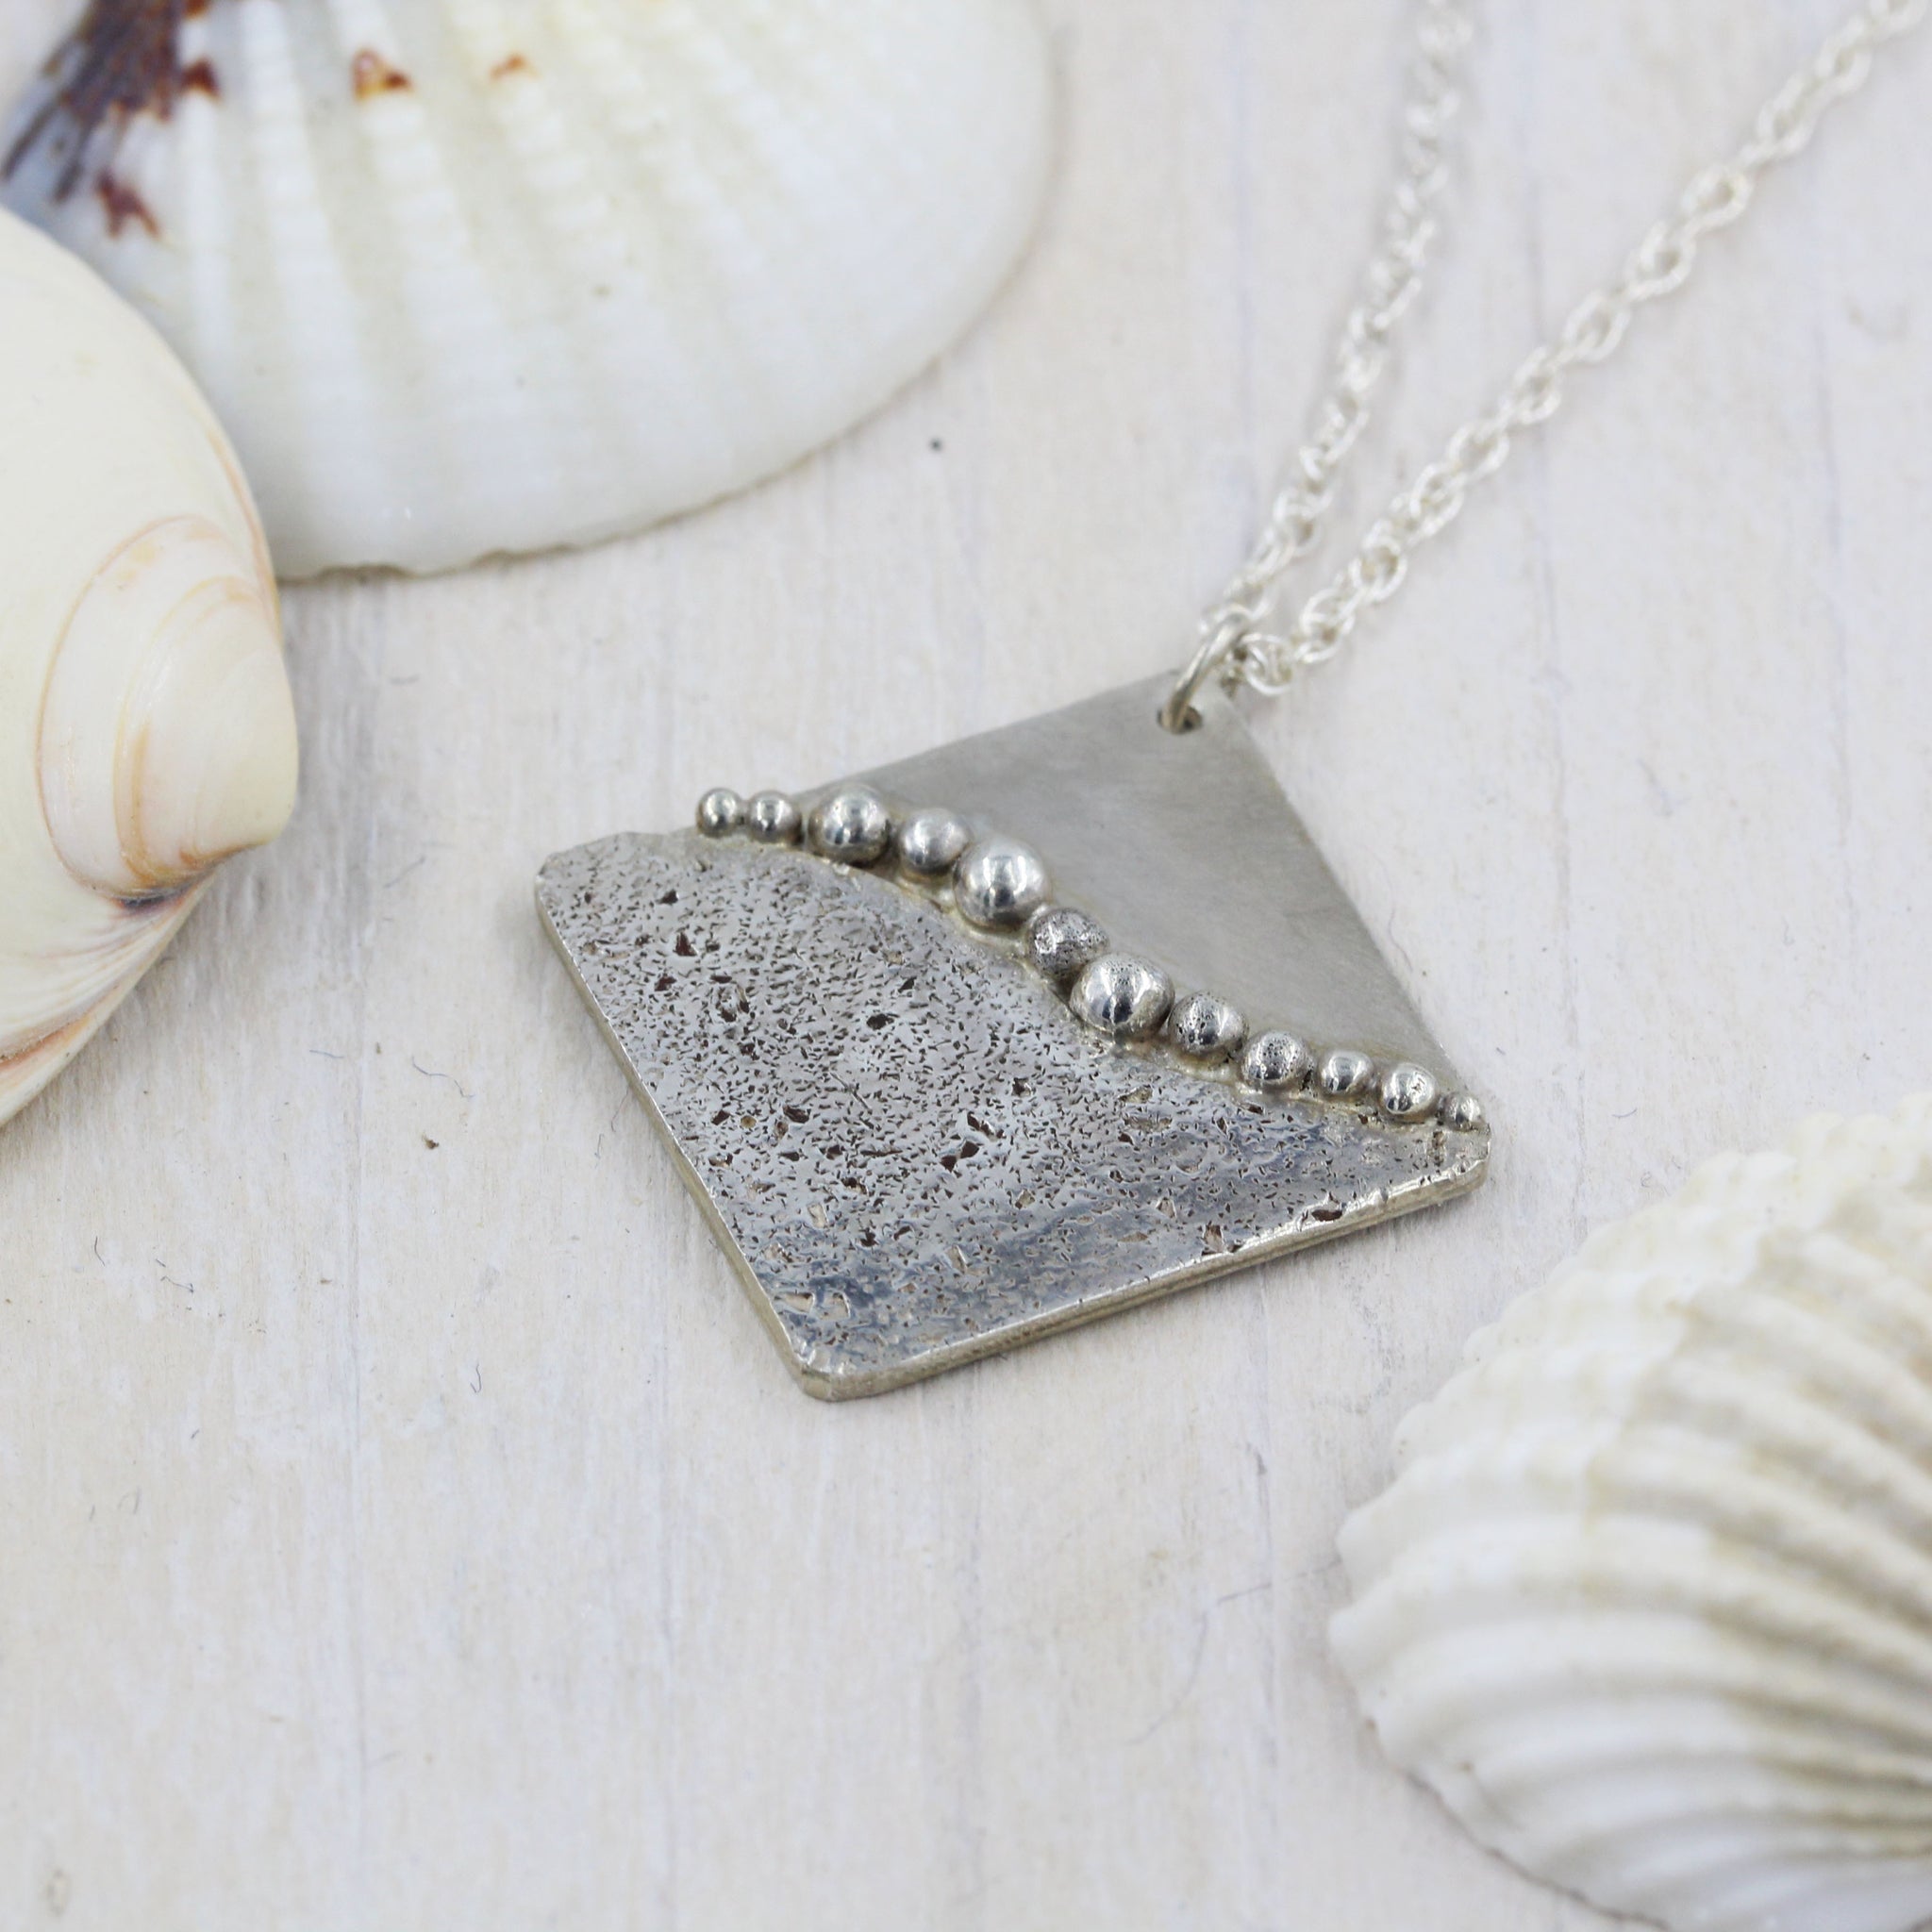 Handmade sea inspired, sterling silver necklace  